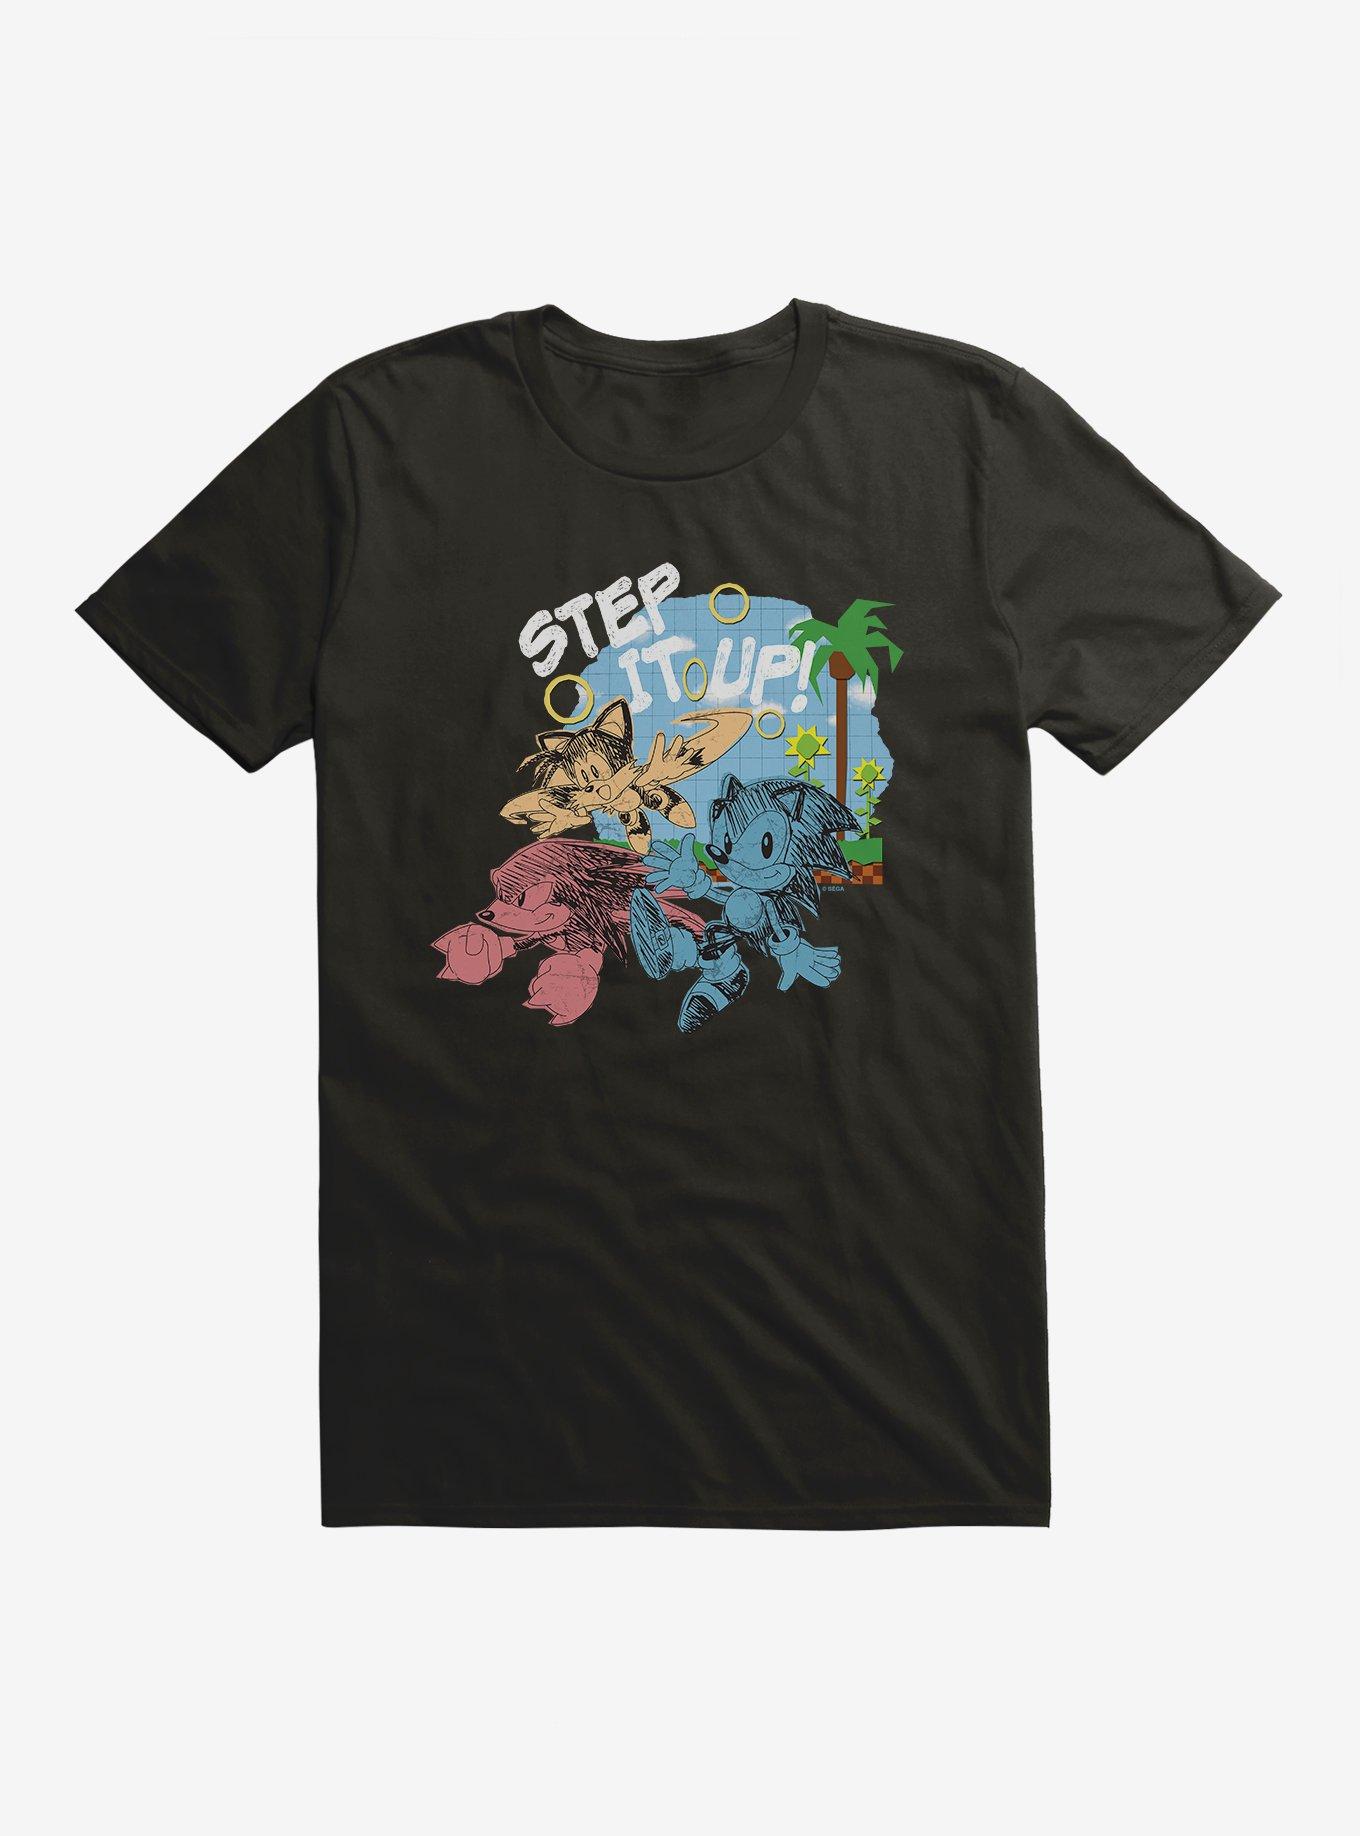 Sonic The Hedgehog Tails, Knuckles, And Sonic Step It Up! T-Shirt, , hi-res